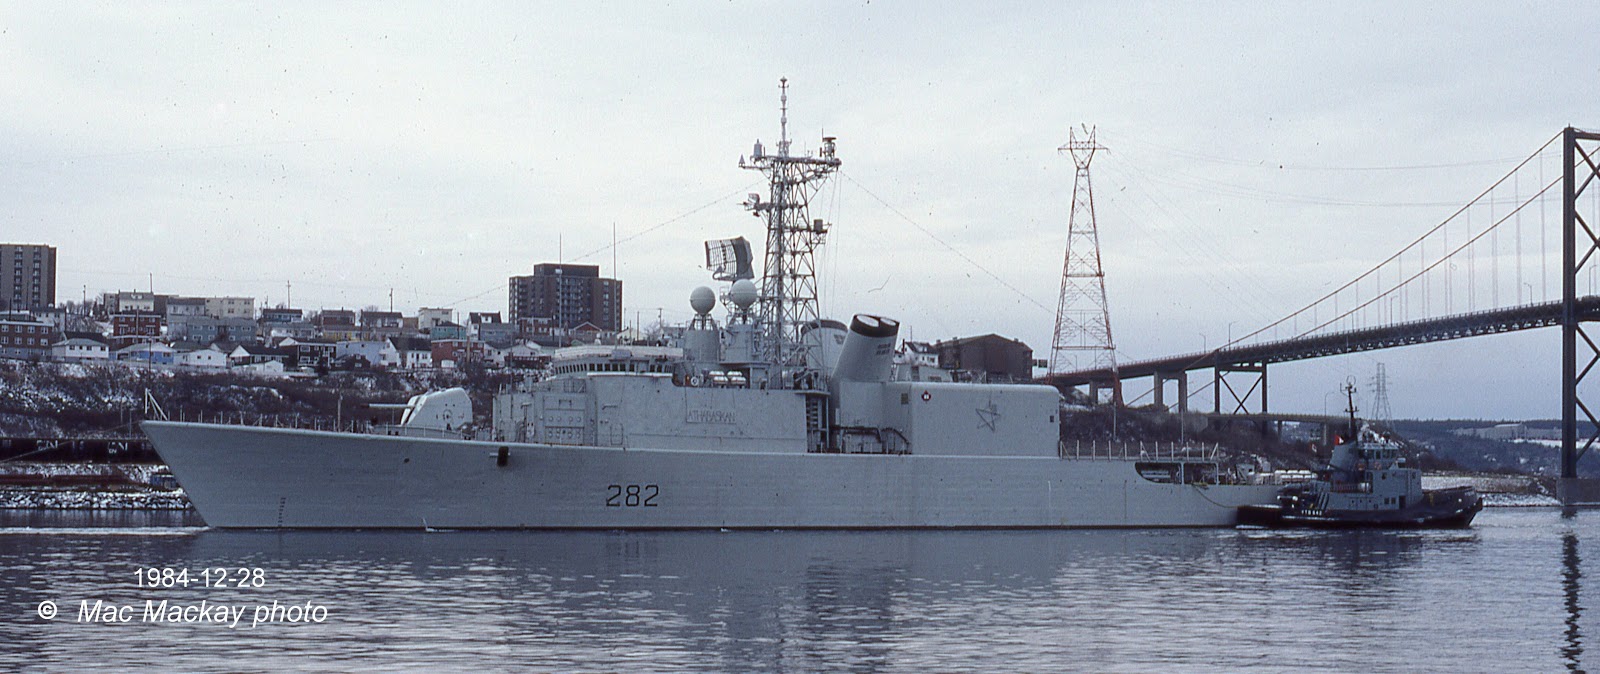 Shipfax: HMCS Athabaskan tow in trouble - AMENDED